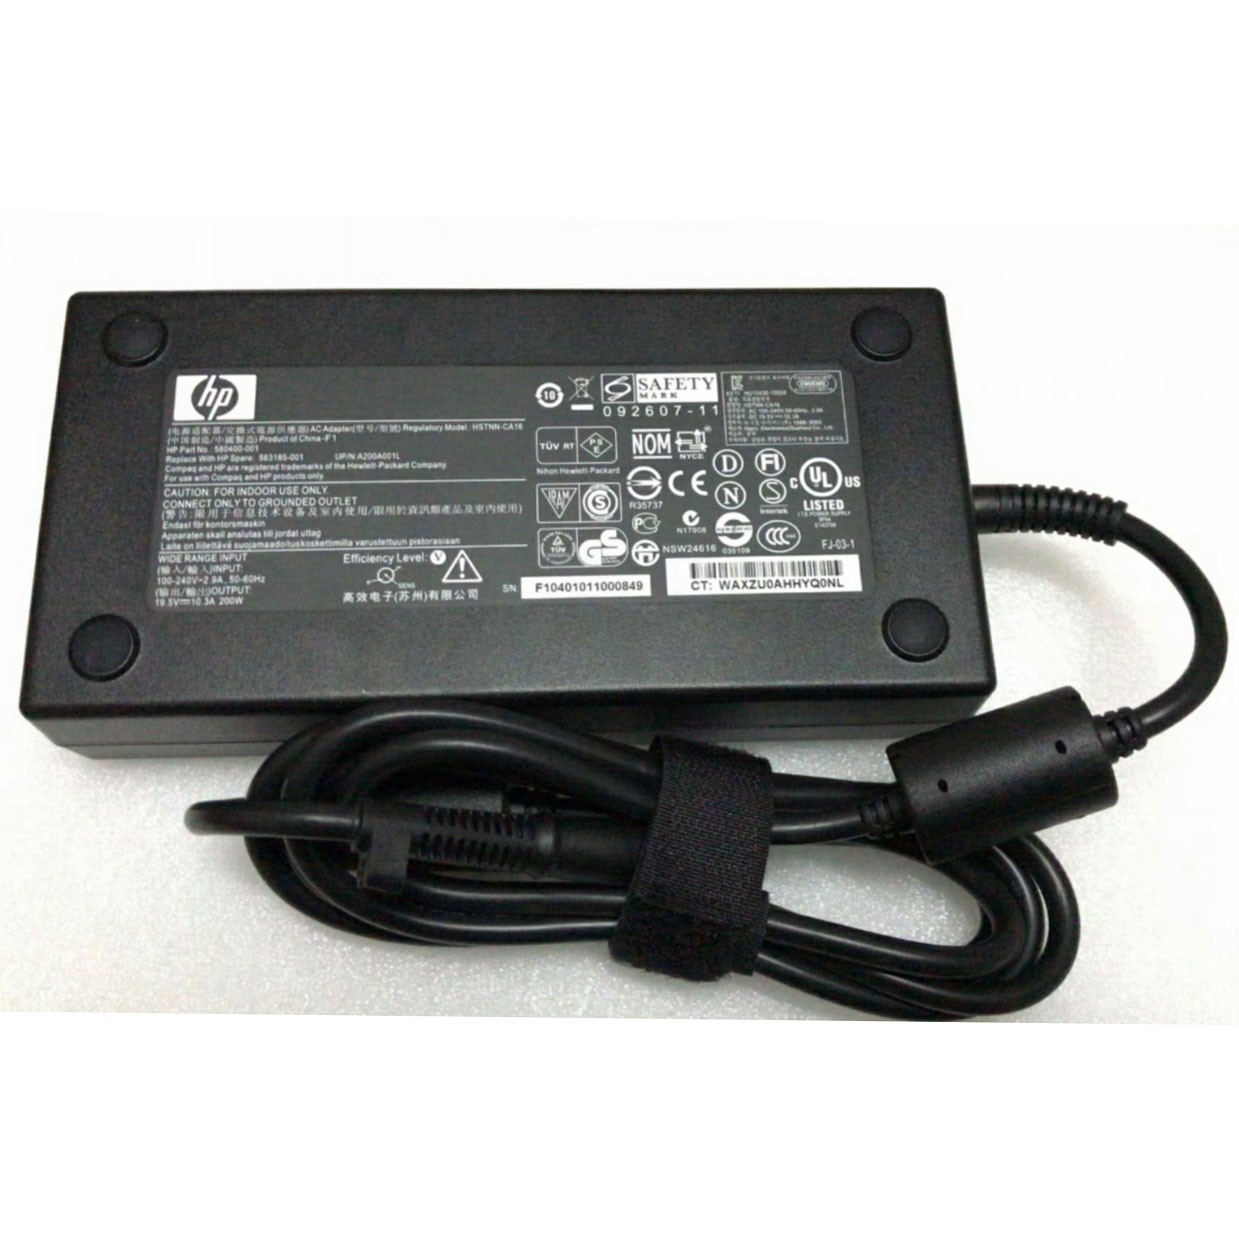 Genuine 200W HP 910845-001 AC Adapter Charger + Free Cord Laptop Power Supply Adapter Cord